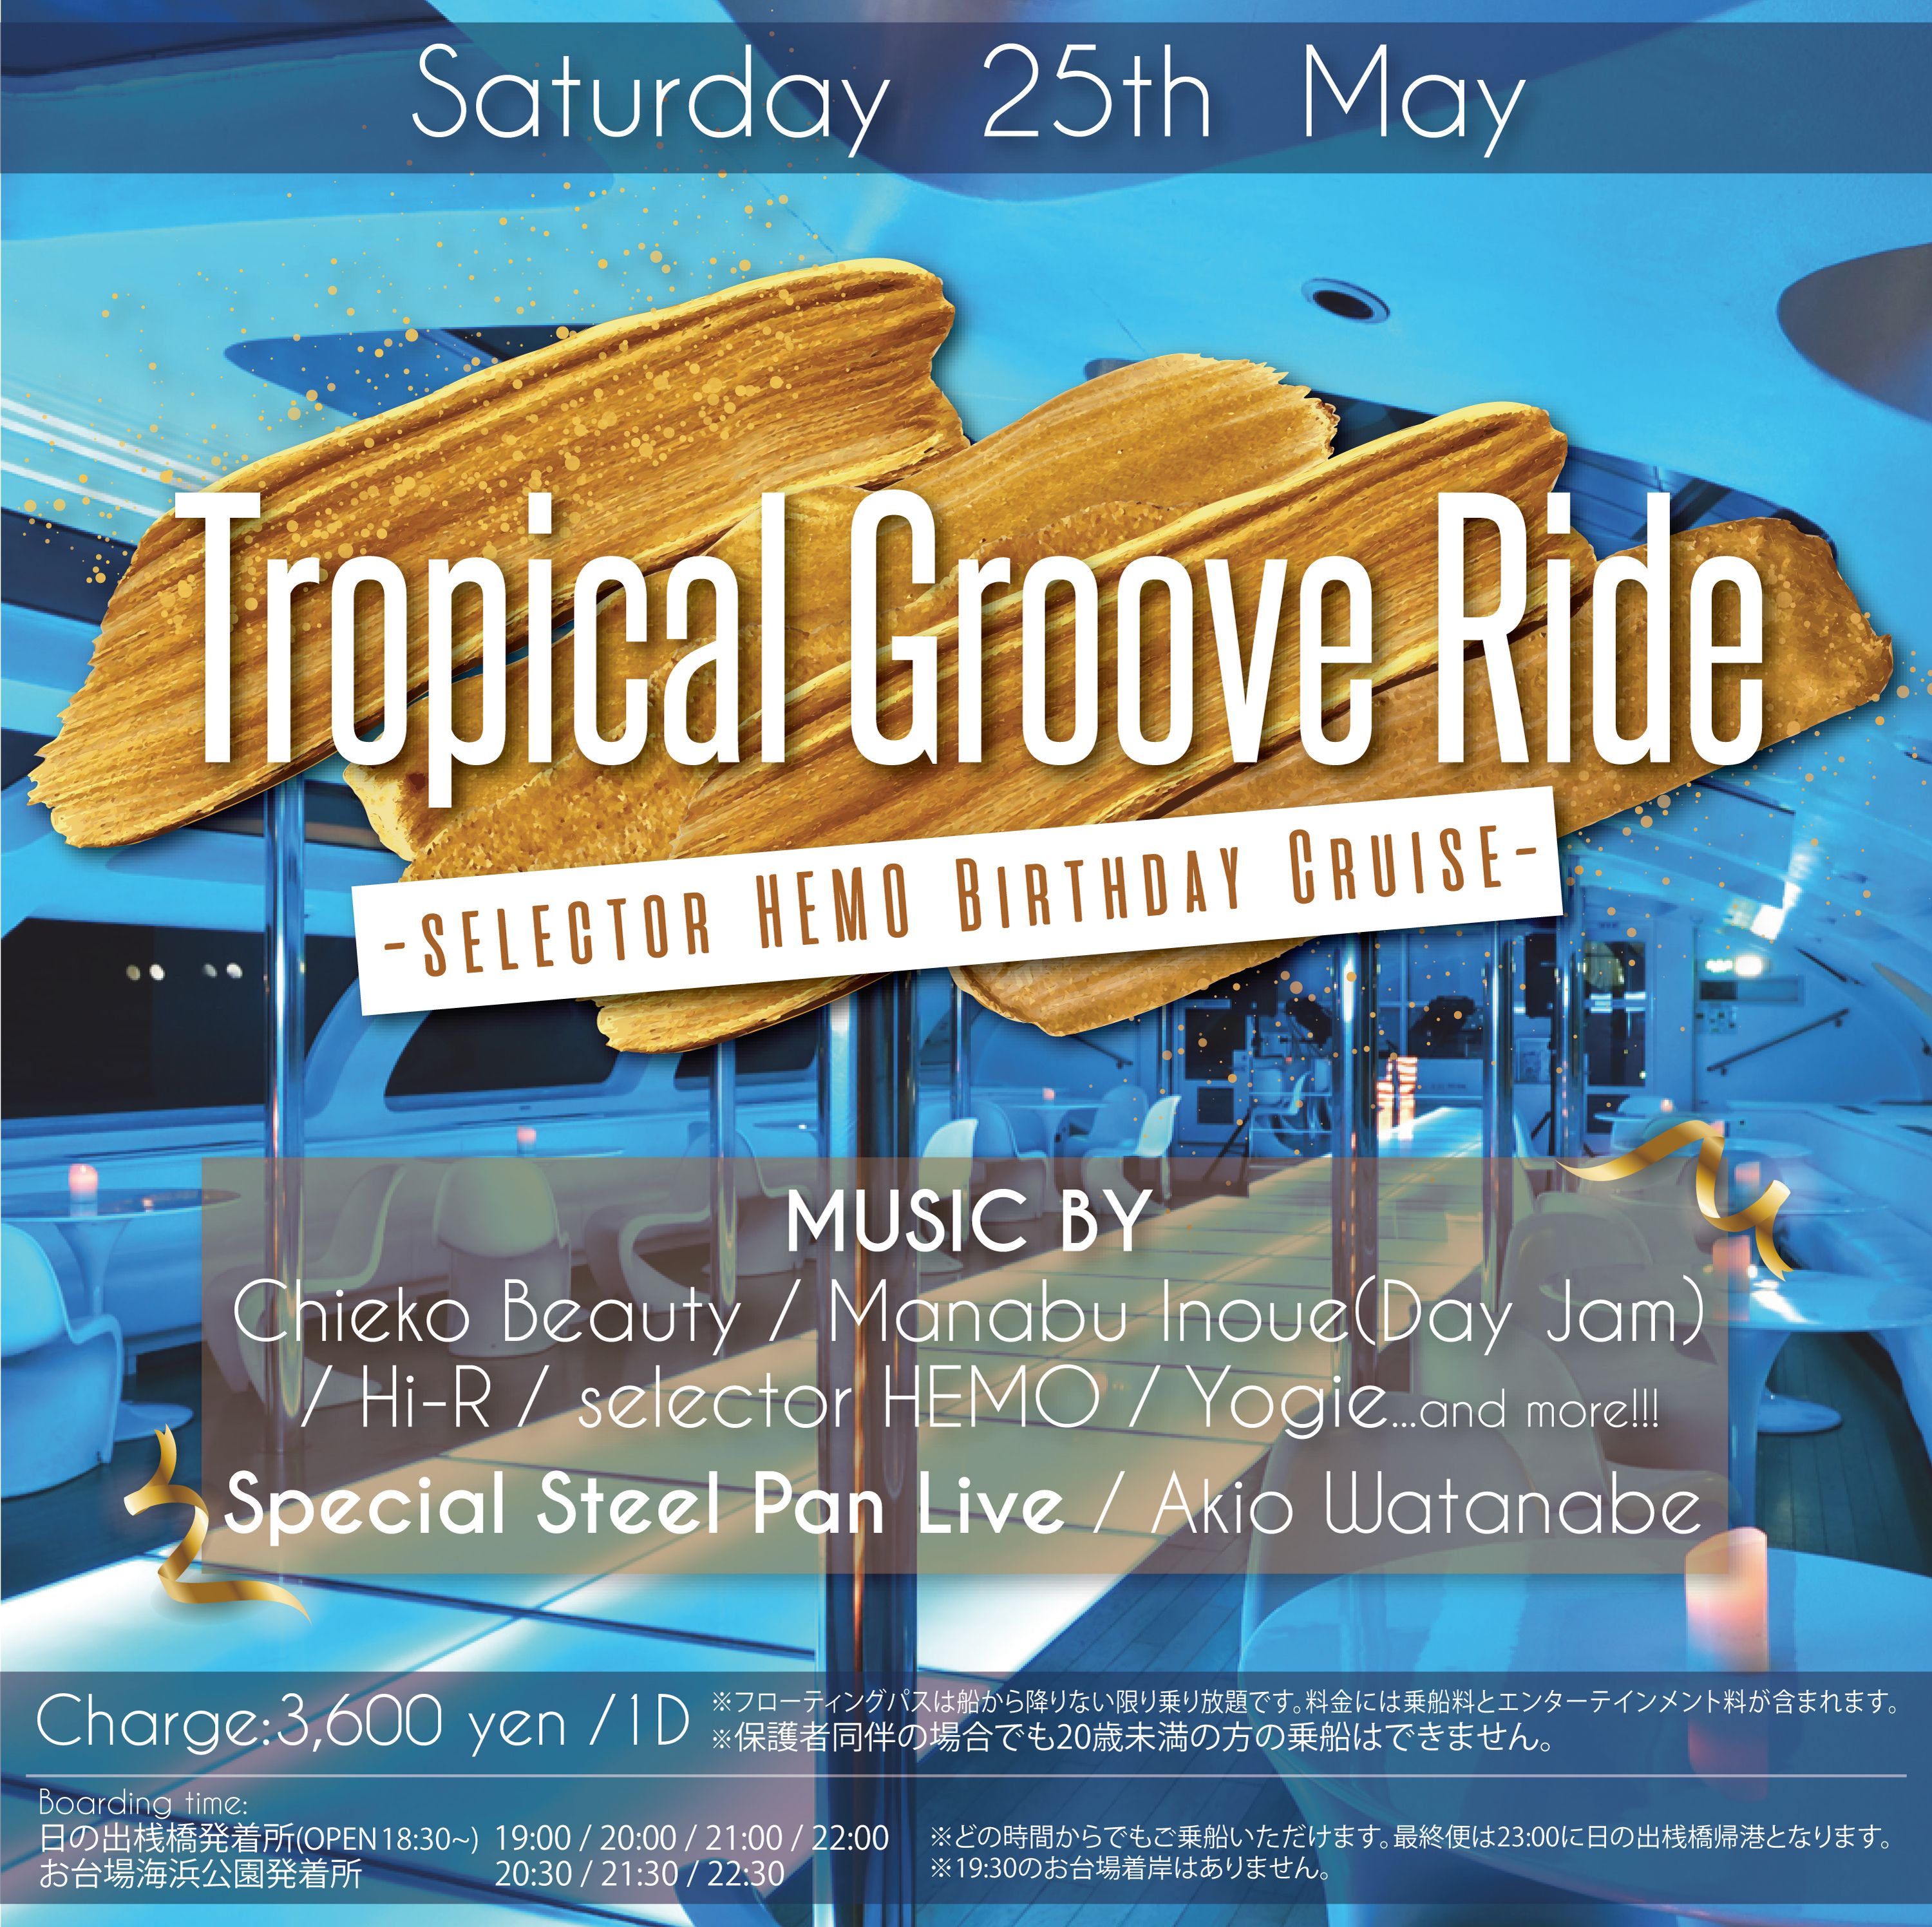  Tropical Groove Ride  